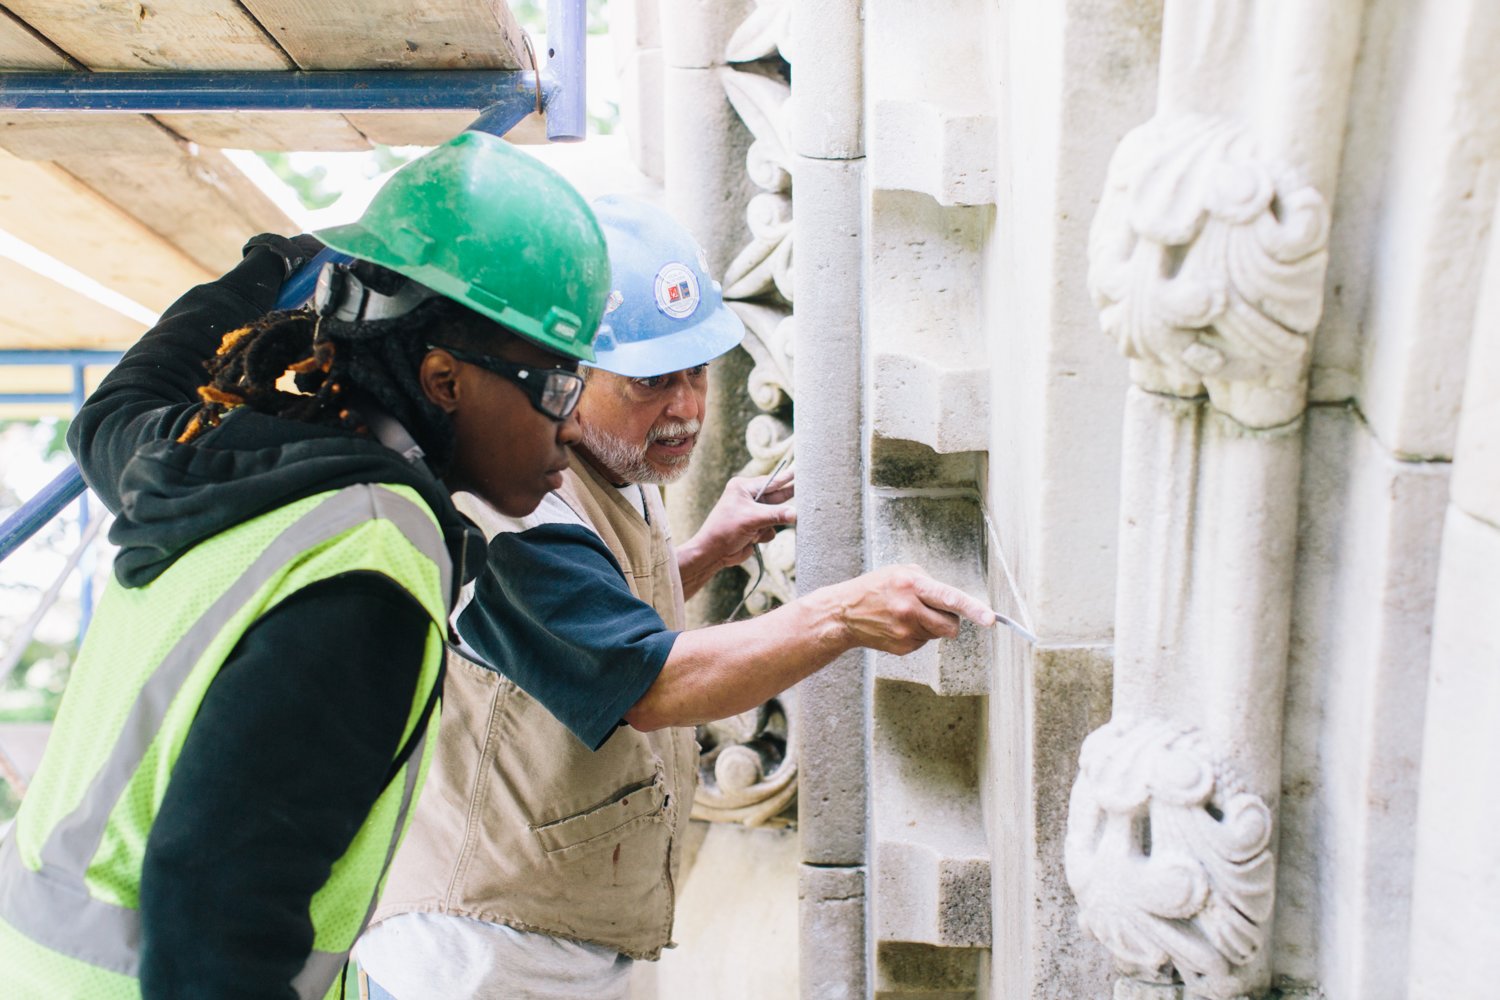 The Bridge to Crafts Careers Program, launched by the World Monuments Fund in 2015 at Woodland Cemetery in the Bronx, gives a selected group of interns the opportunity to learn masonry cleaning, conservation and maintenance techniques, along with a possible career track. The program expanded to Green-Wood Cemetery in Brooklyn a few years later. Above, a master craftsman instructed one of the program’s participants at Green-Wood in 2018.